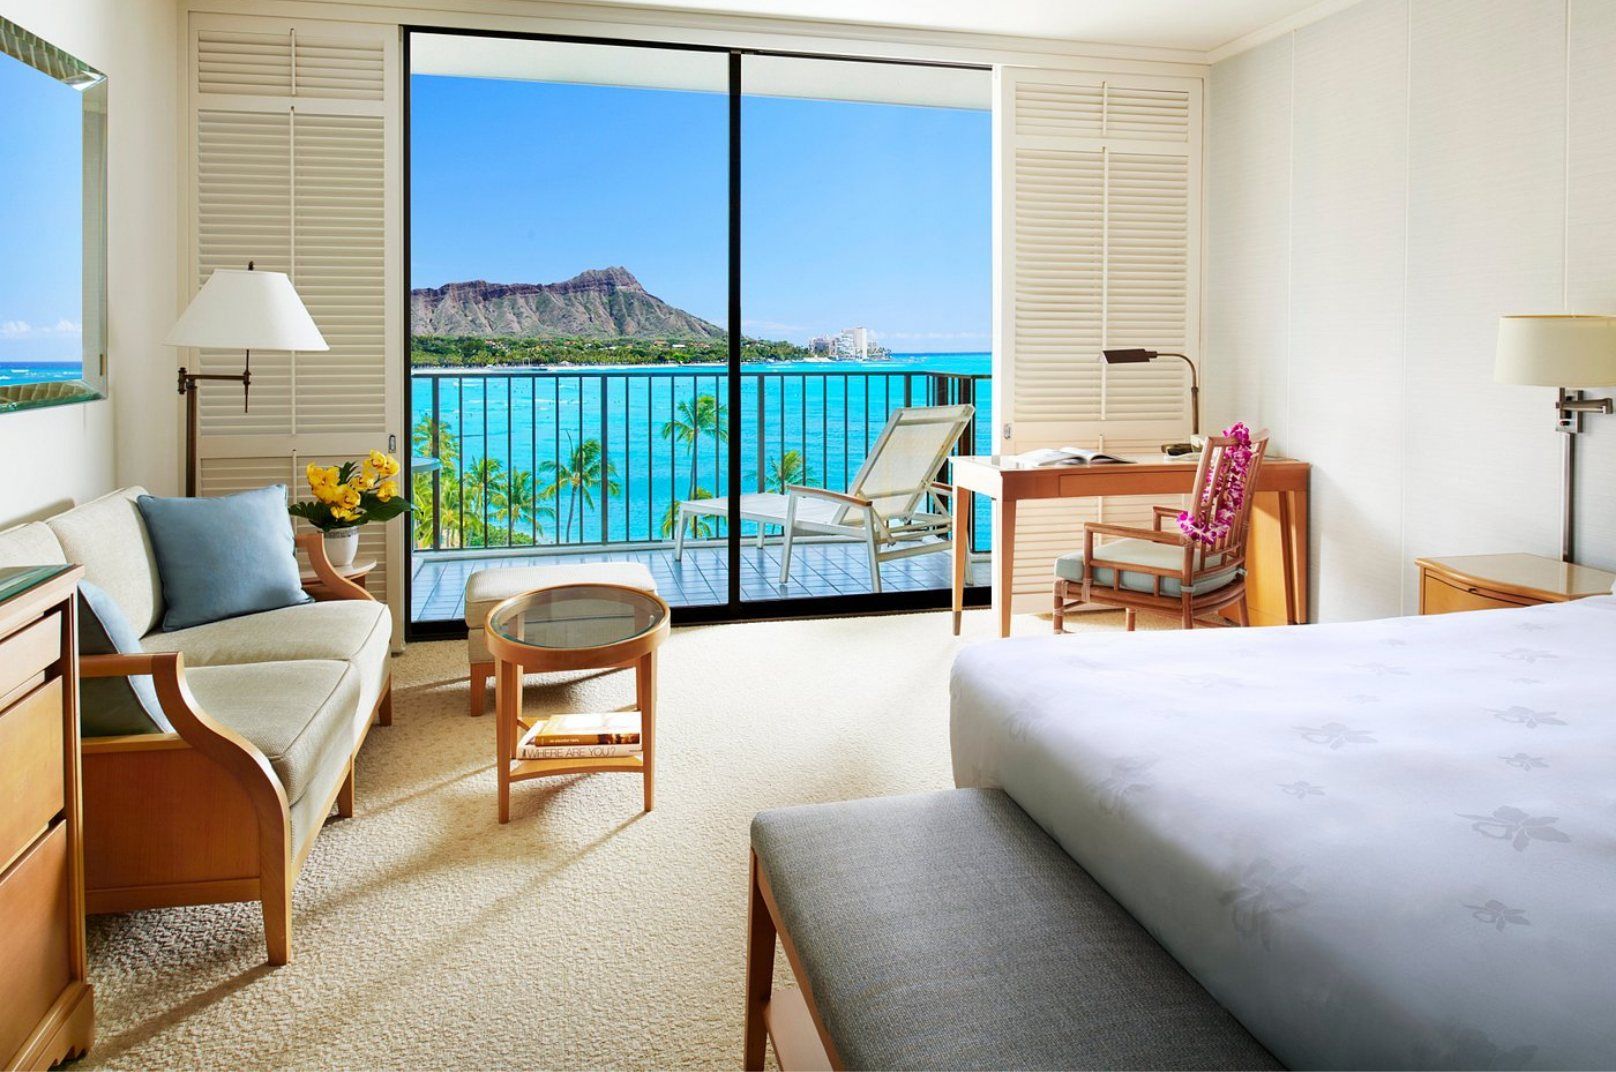 The Best Hotels in Oahu for Couples